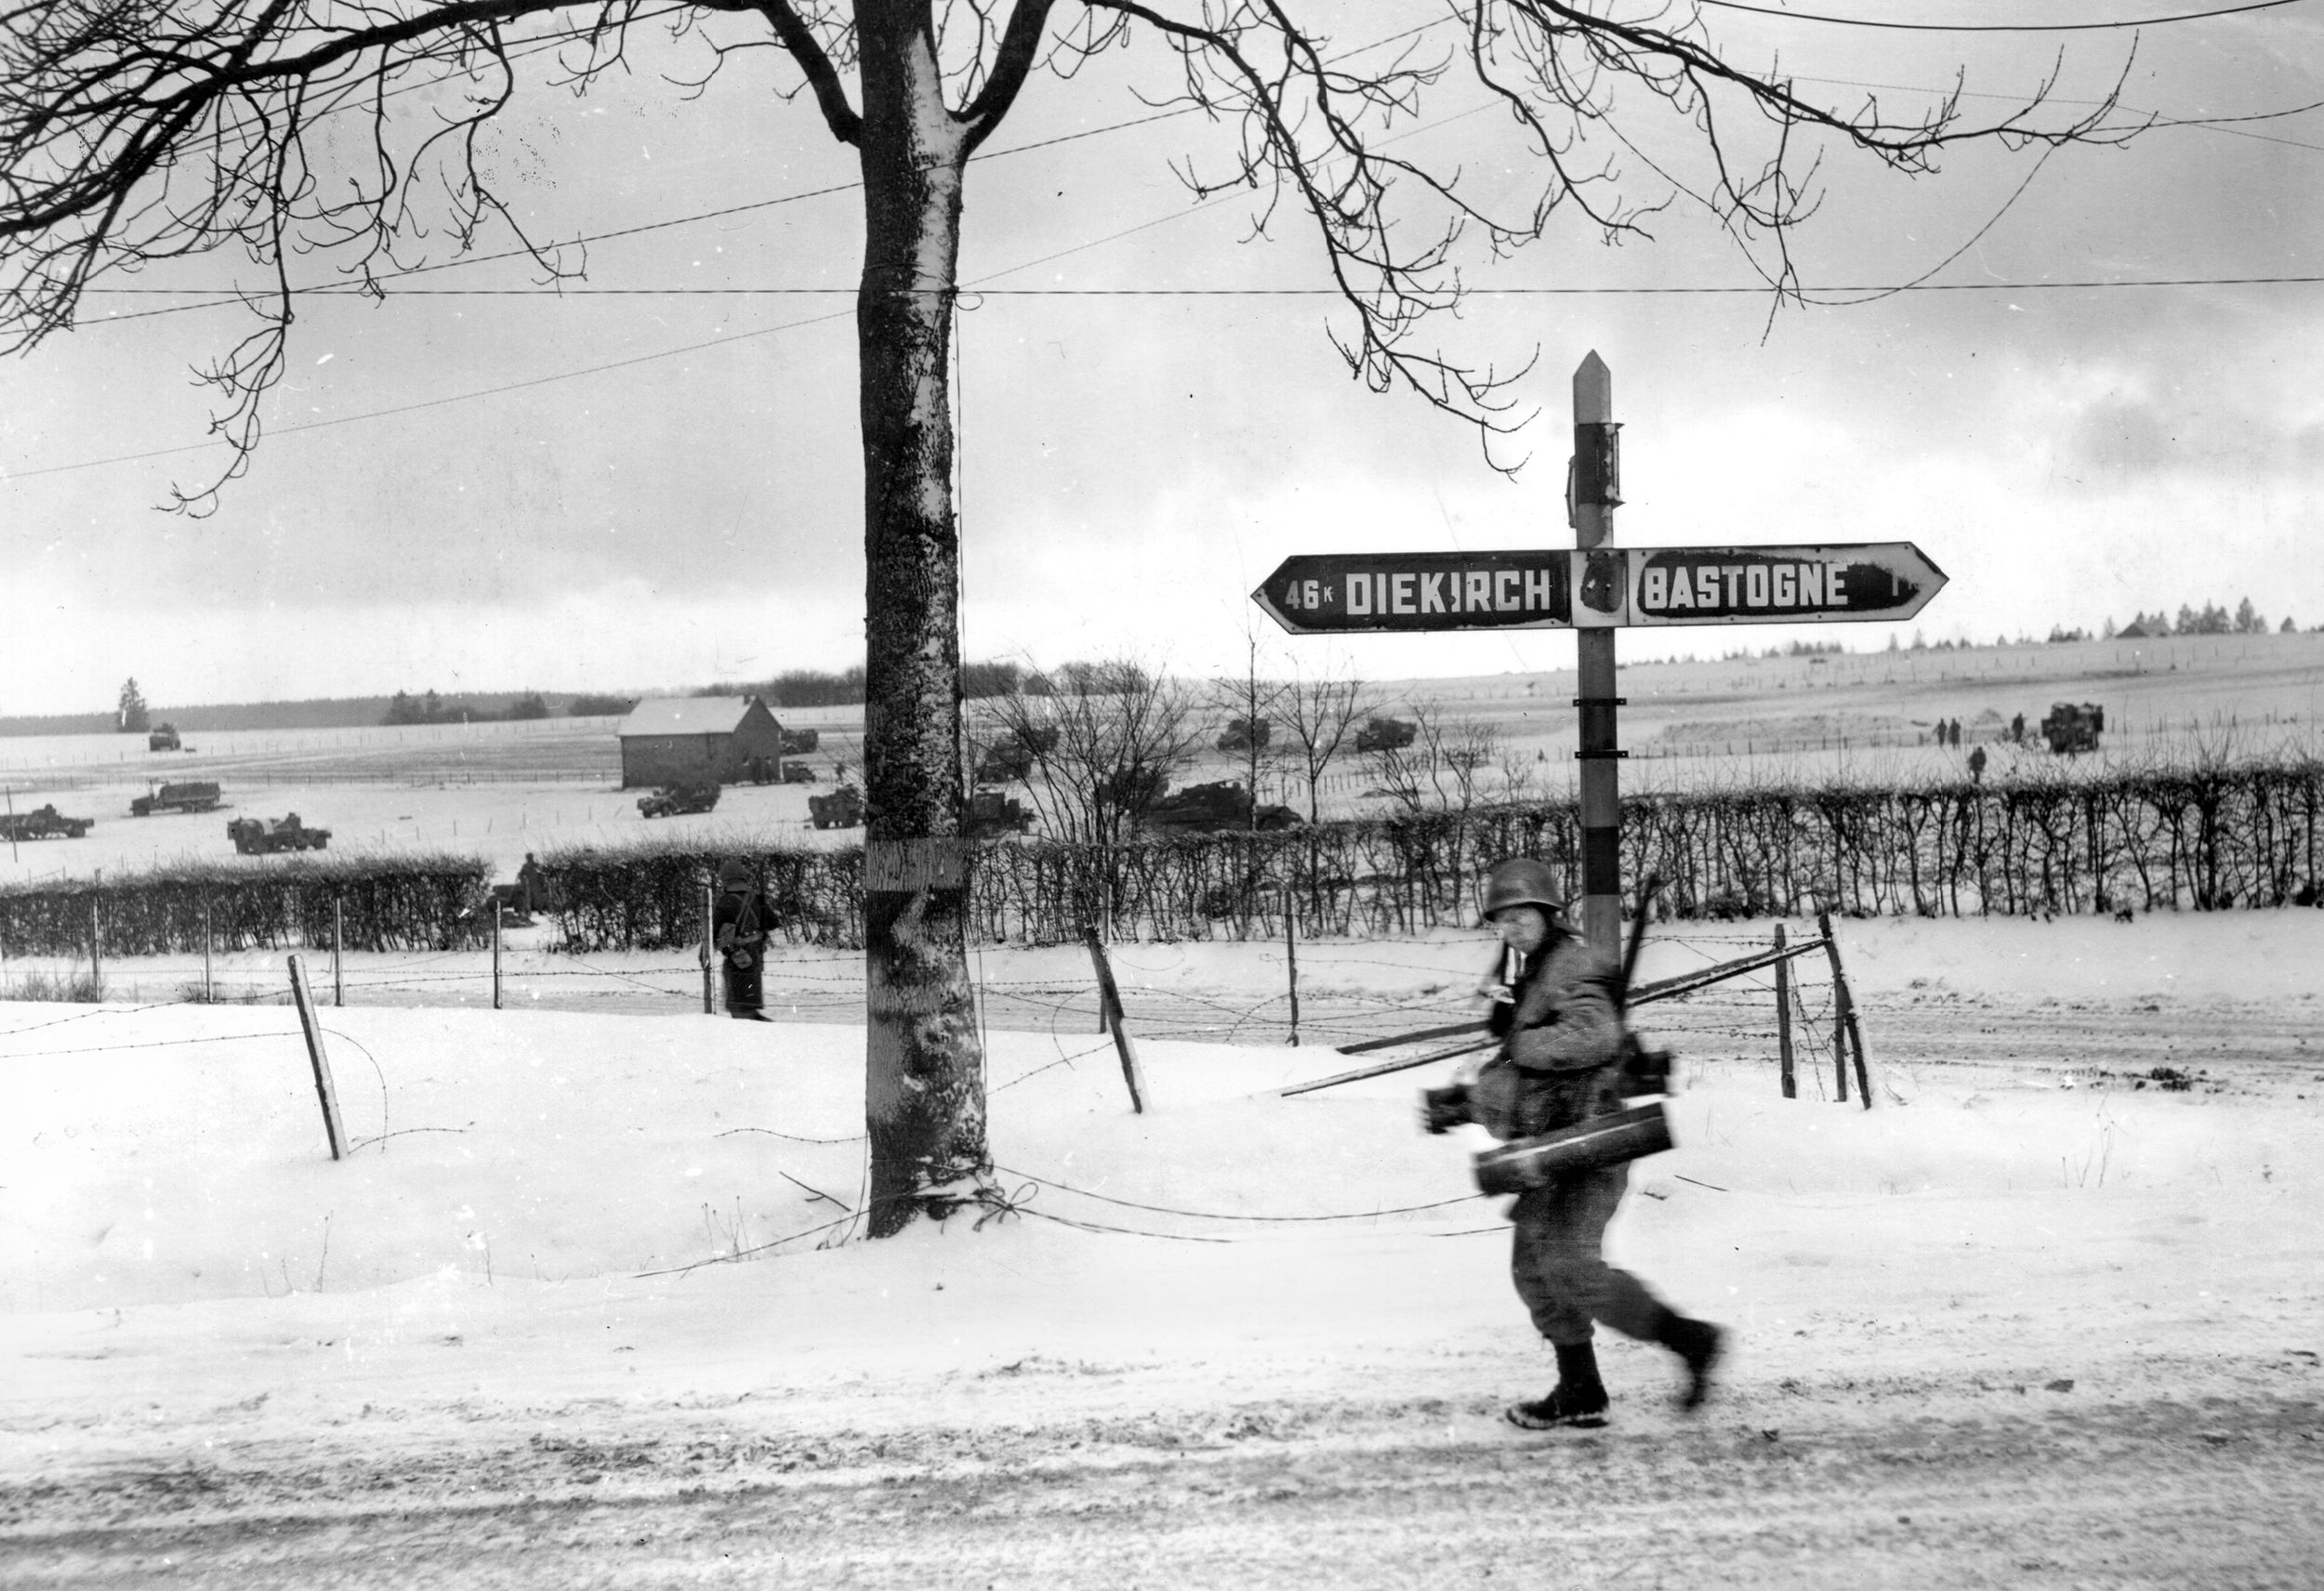 An American soldier of the 44th Armored Infantry Regiment, 6th Armored Division, carries a bazooka along a road near the outskirts of Bastogne, the embattled Belgian crossroads that was held against the Germans during the Battle of the Bulge. This infantryman is hurrying to join with tanks preparing to attack the Germans surrounding Bastogne.